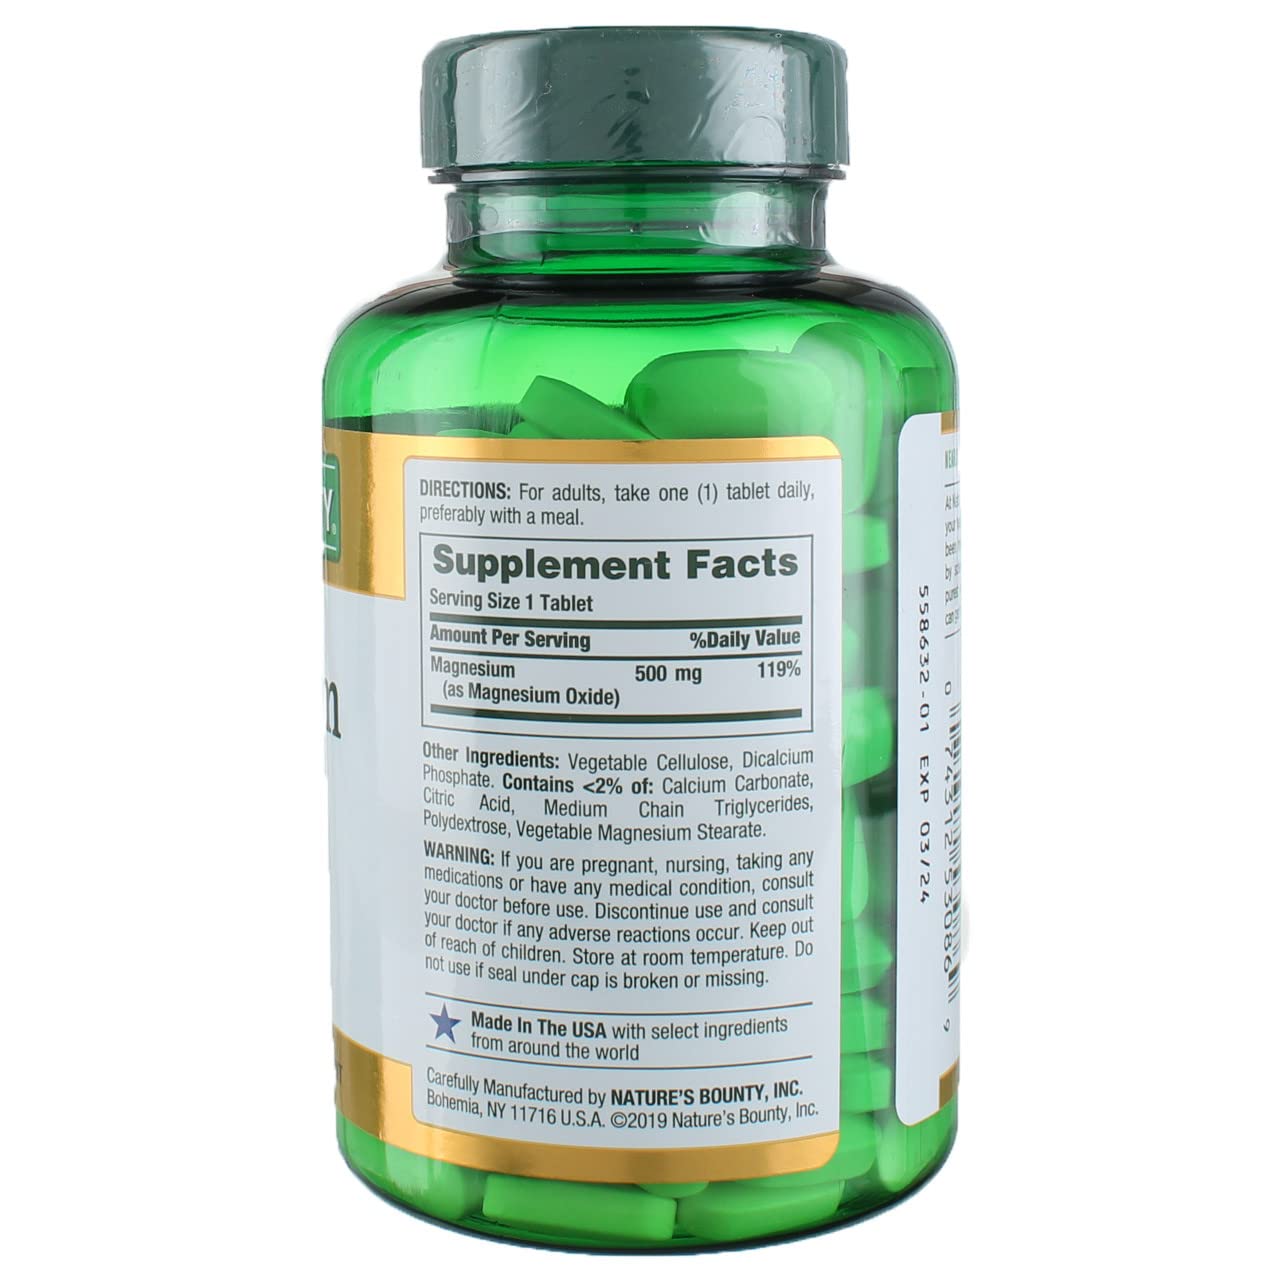 Nature's Bounty Magnesium 500 mg, 200 Tablets (2 Pack)